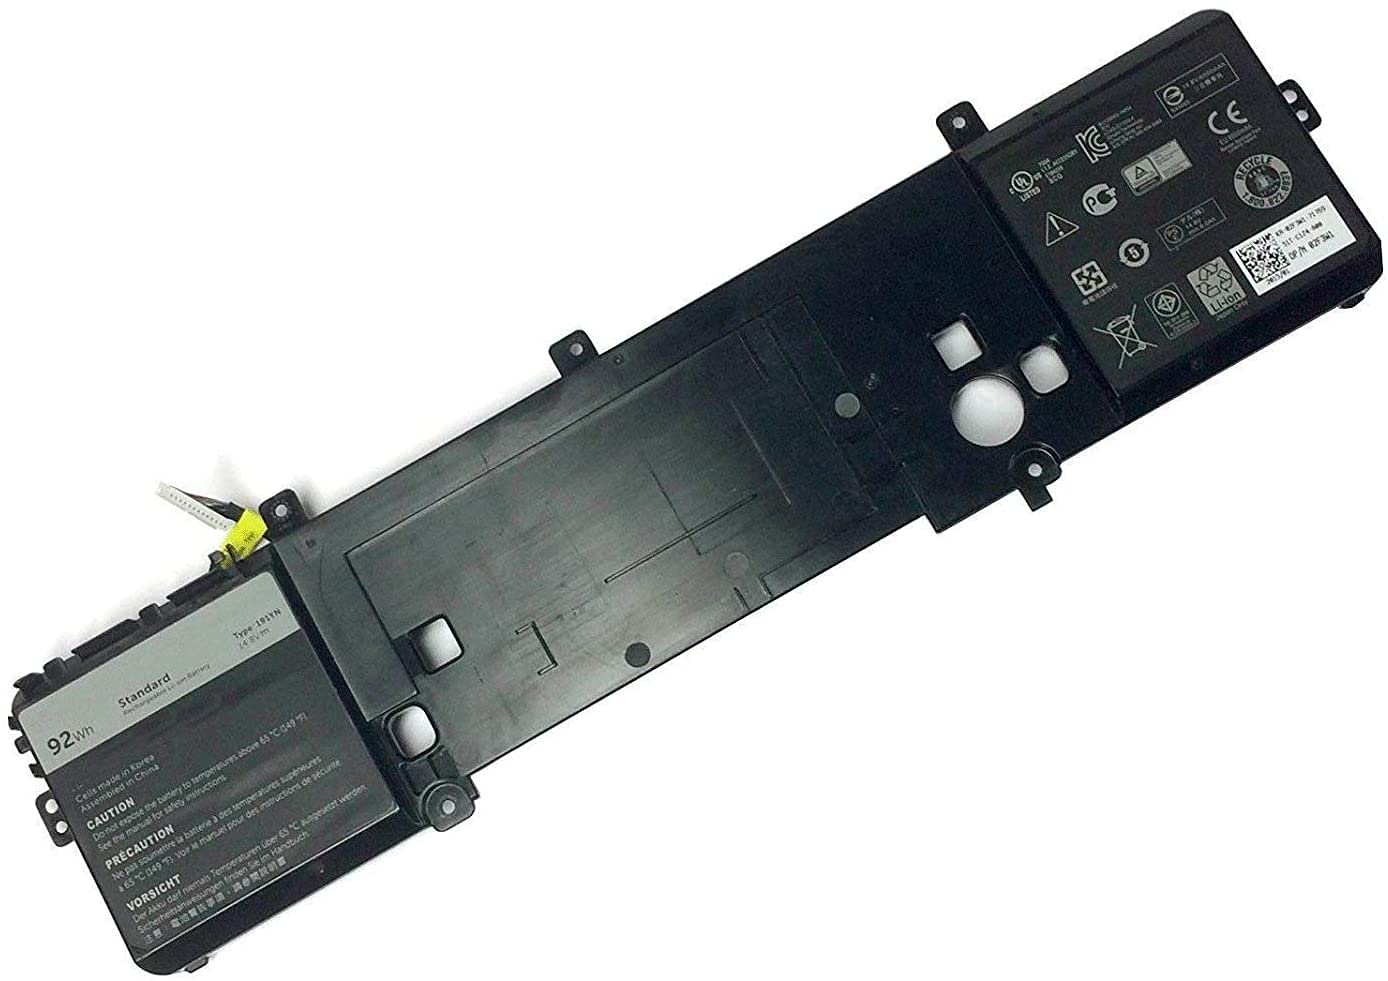 191YN Laptop Battery Compatible with Dell Alienware 15 R1 R2 Series ALW15ED-1718 1728 1828 1828T 2718 2728 Series Notebook P42F 410GJ 2F3W1 02F3W1 8NH55 08NH55 [14.8V 92Wh 6000mAh 8-Cell]